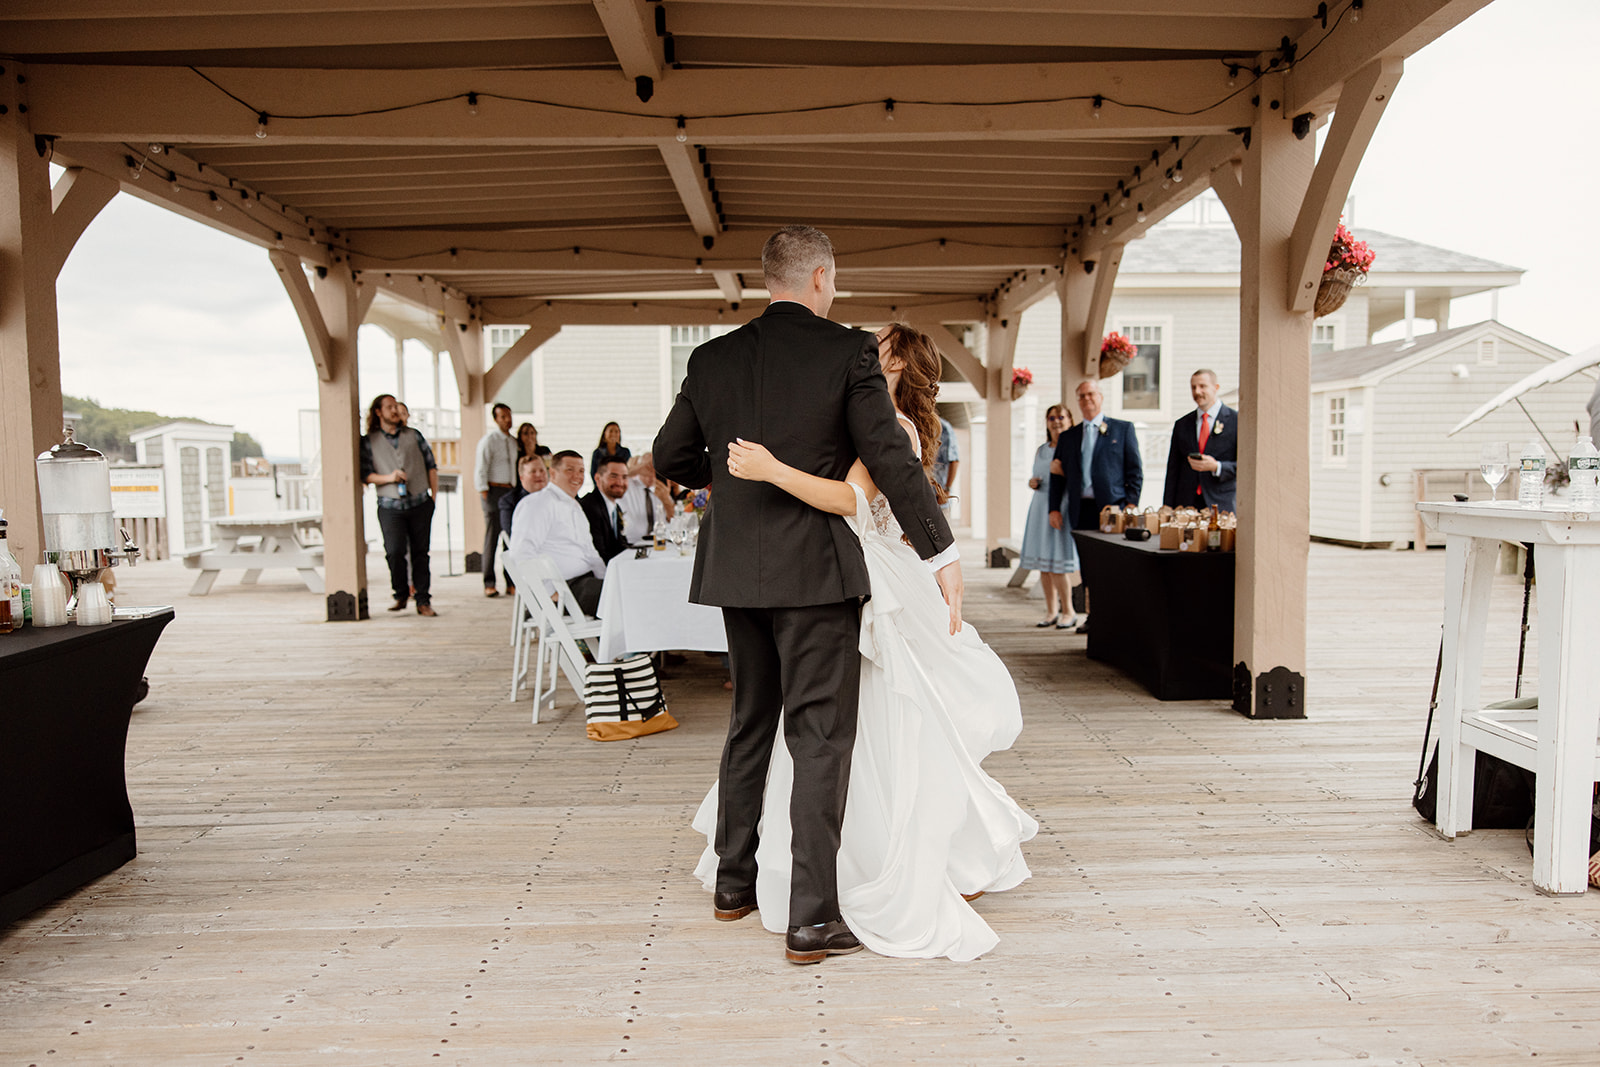 Bride dancing with father at elopement reception